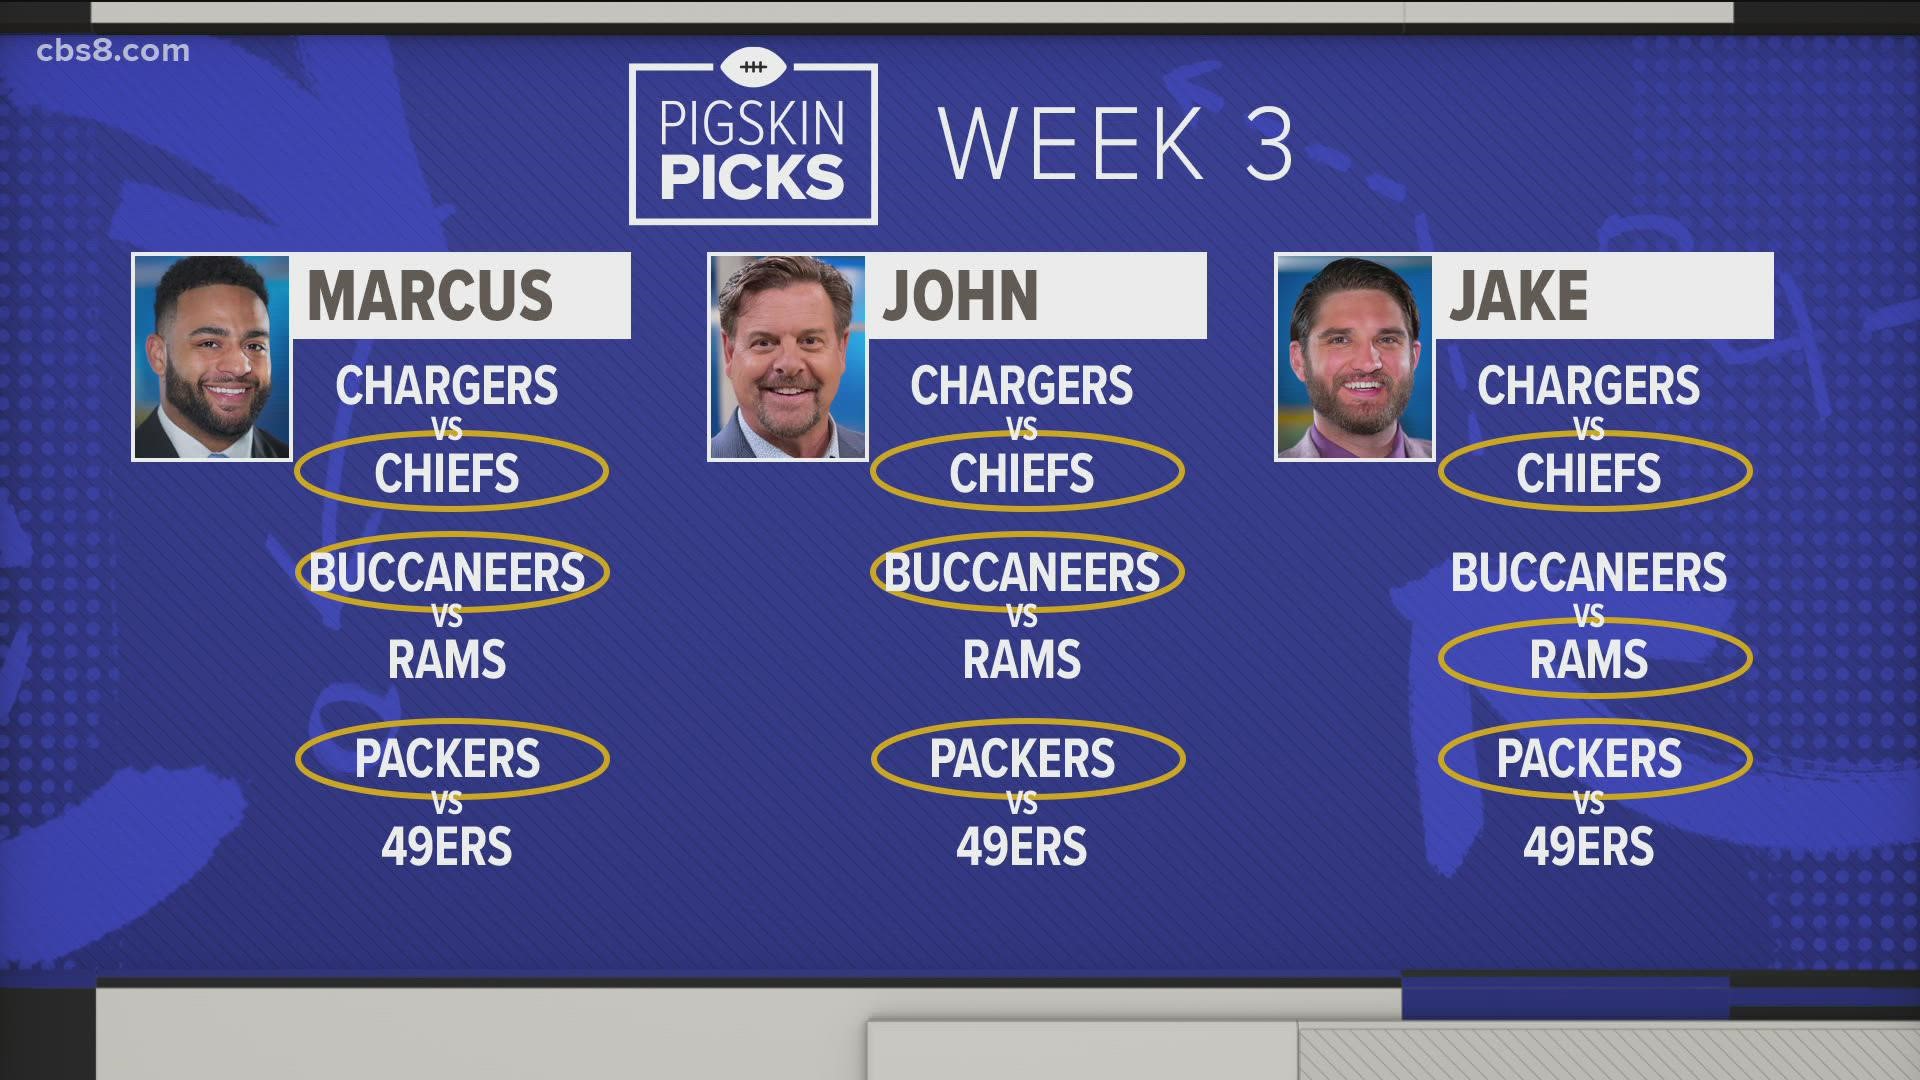 After week 2 of the season, the morning team is still leading over the evening team and the sports team by picking the most NFL winning teams from the past week.